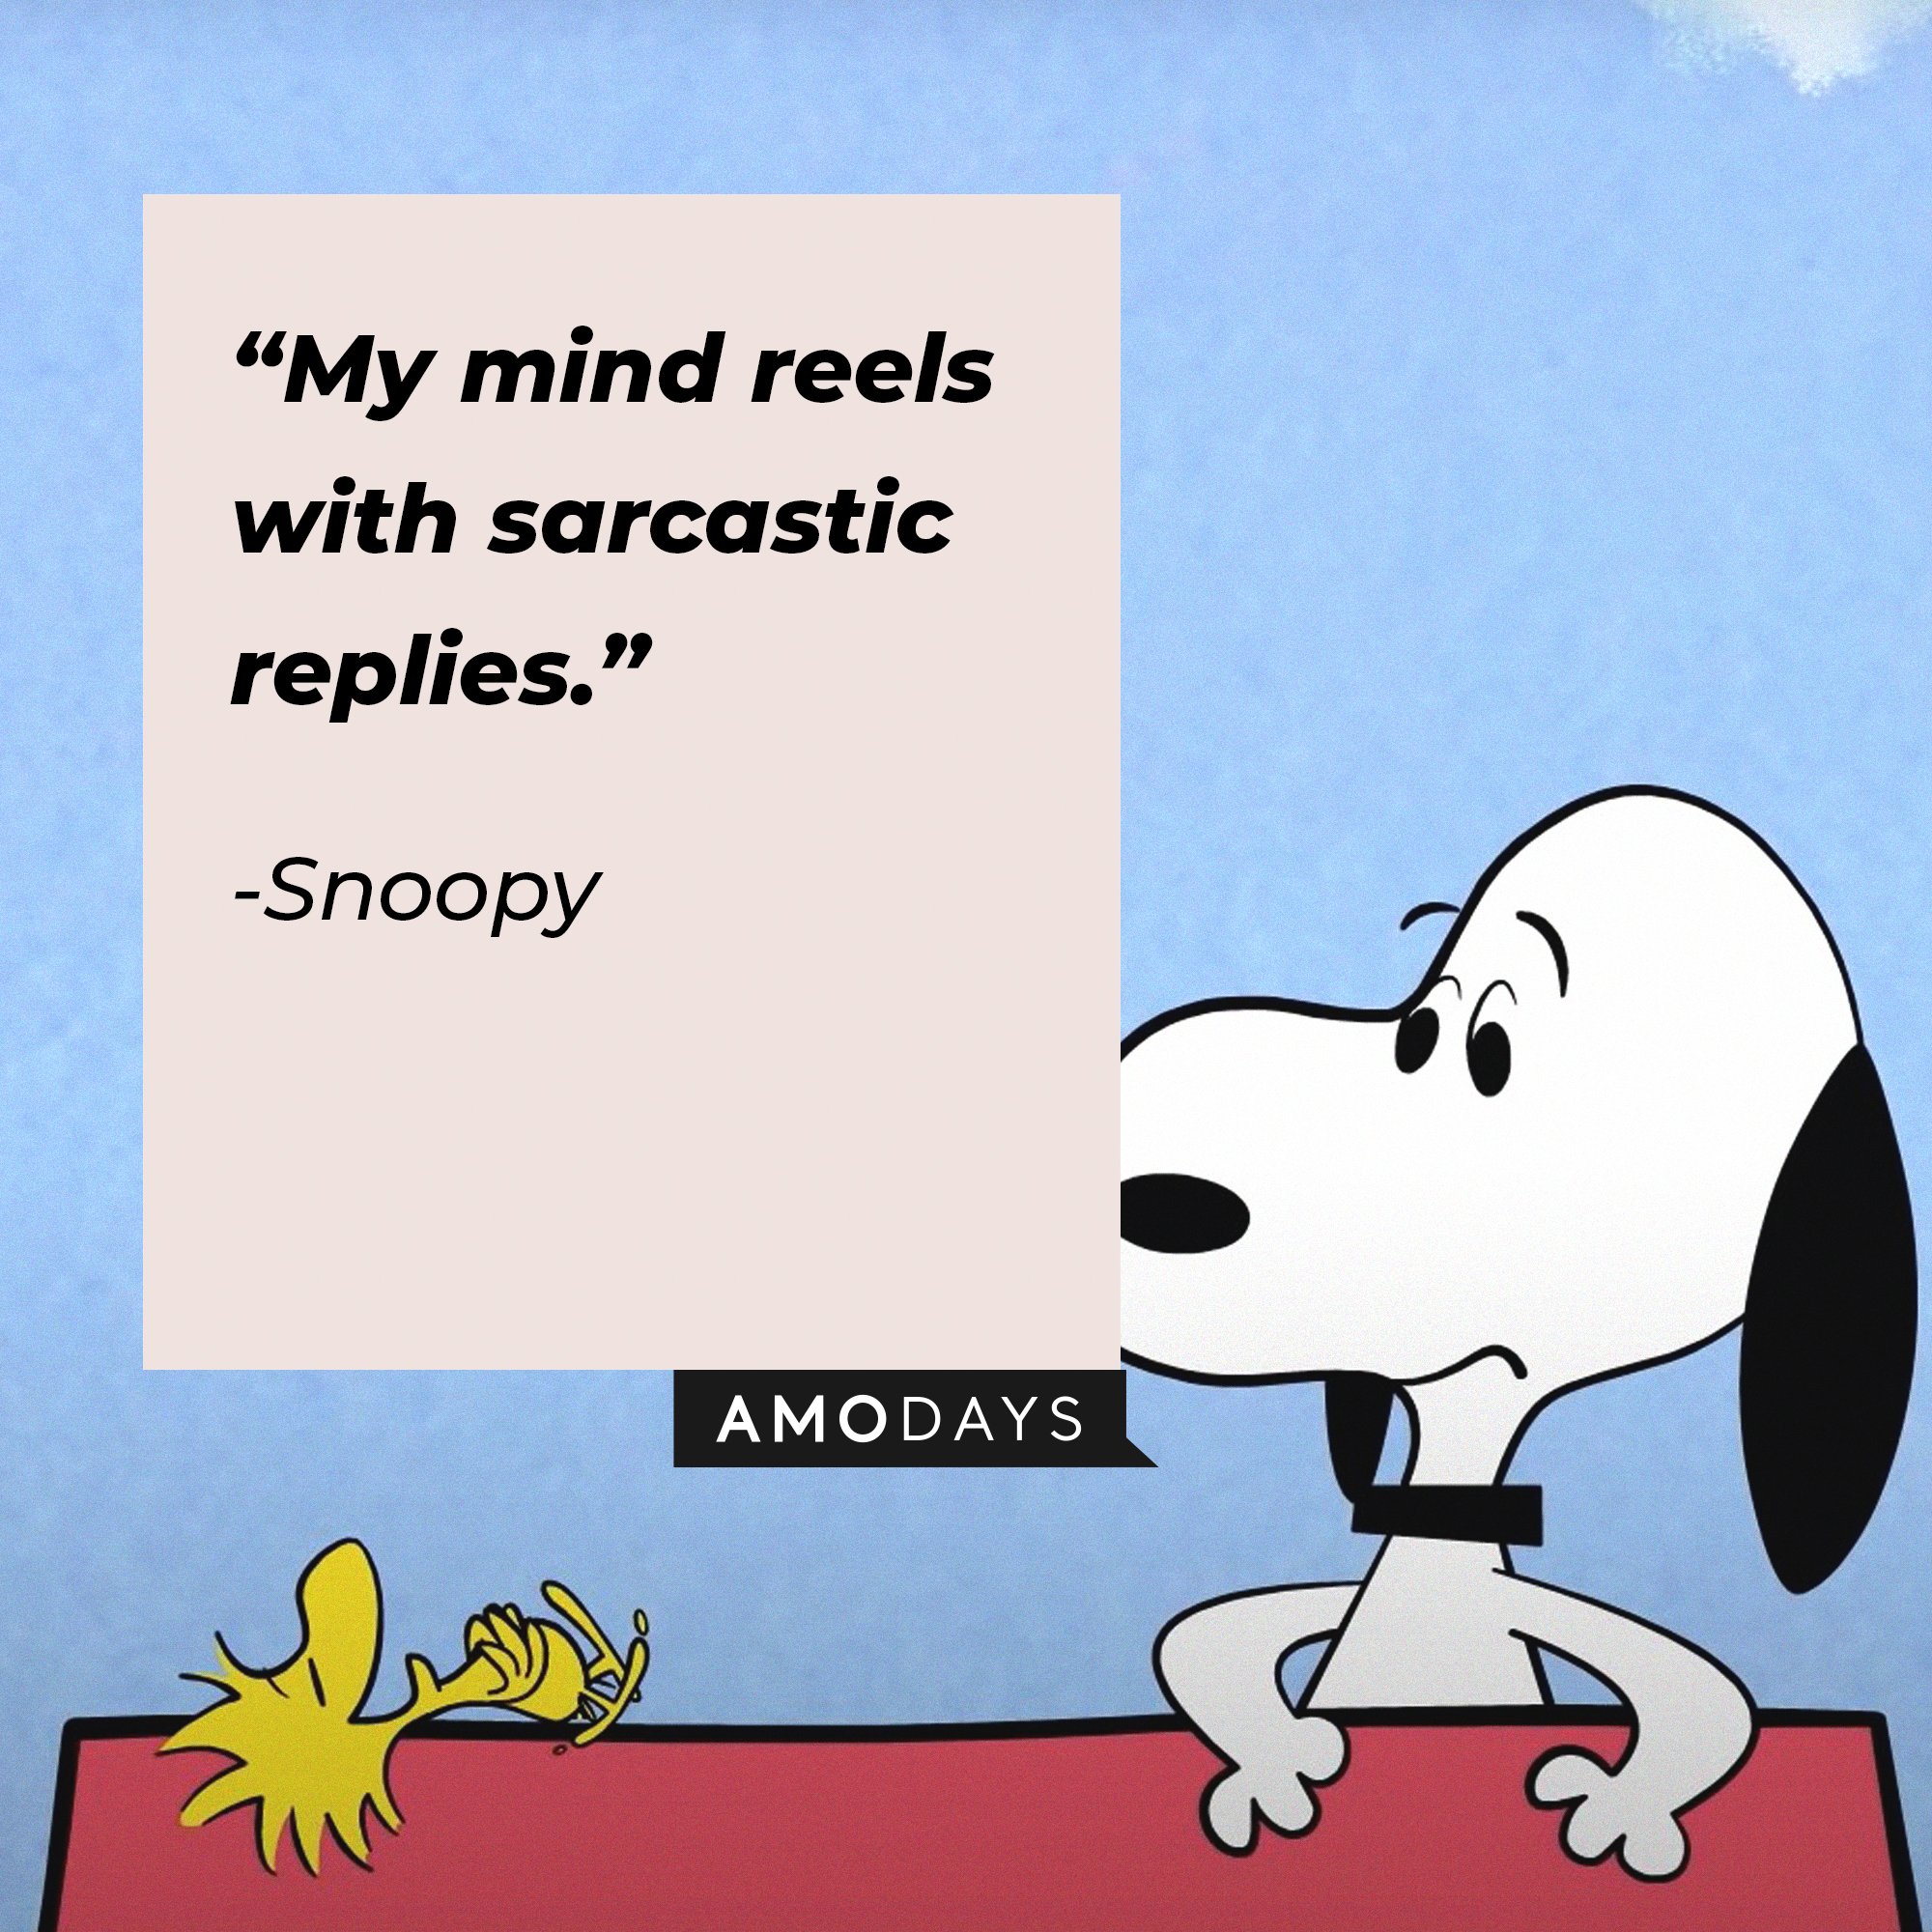 Snoopy’s quote: “My mind reels with sarcastic replies.” | Image: AmoDays 